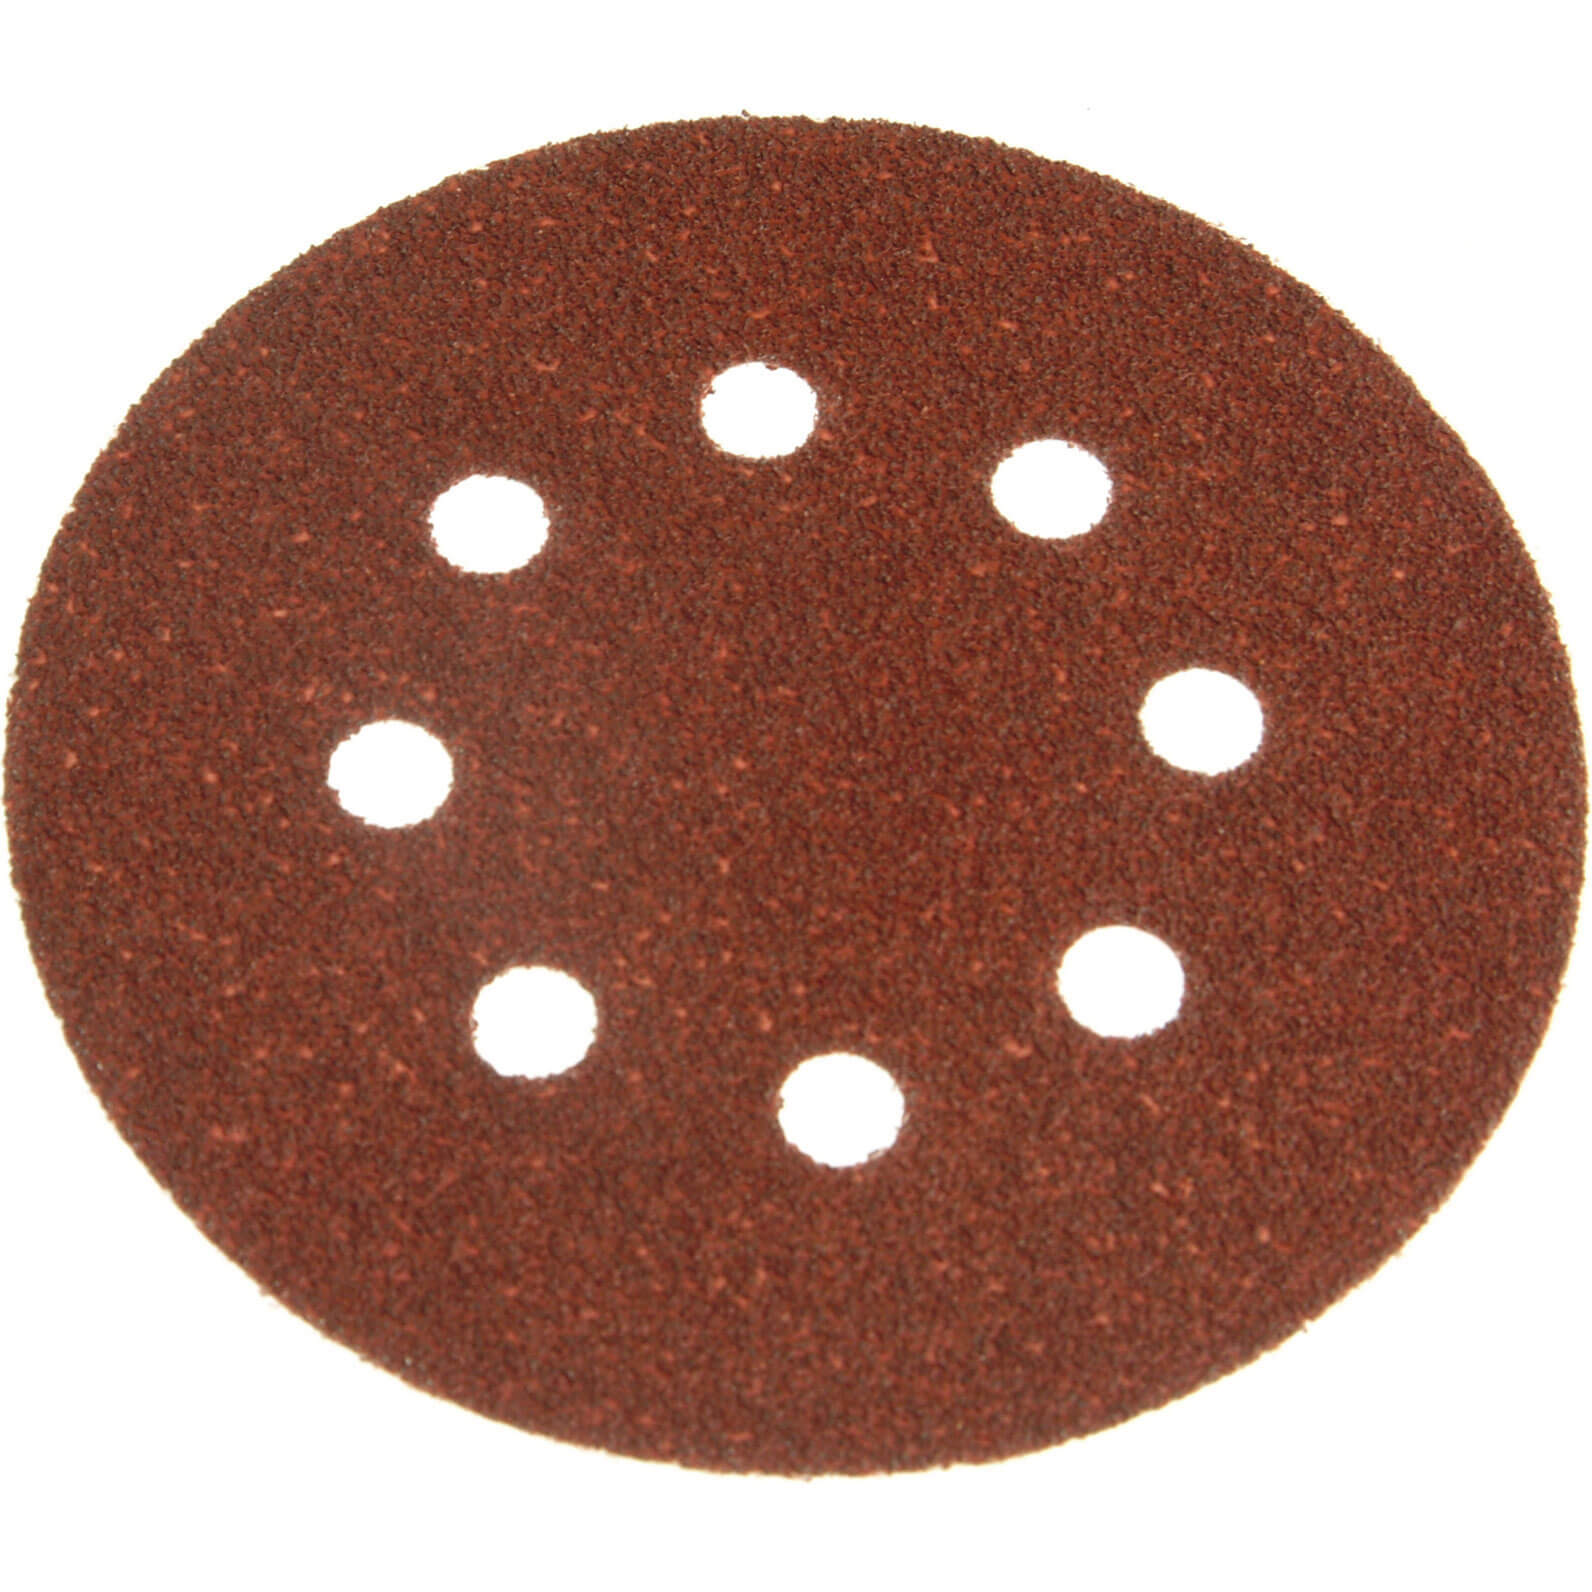 Image of Black and Decker Piranha Quick Fit ROS Sanding Discs 125mm 125mm 80g Pack of 5